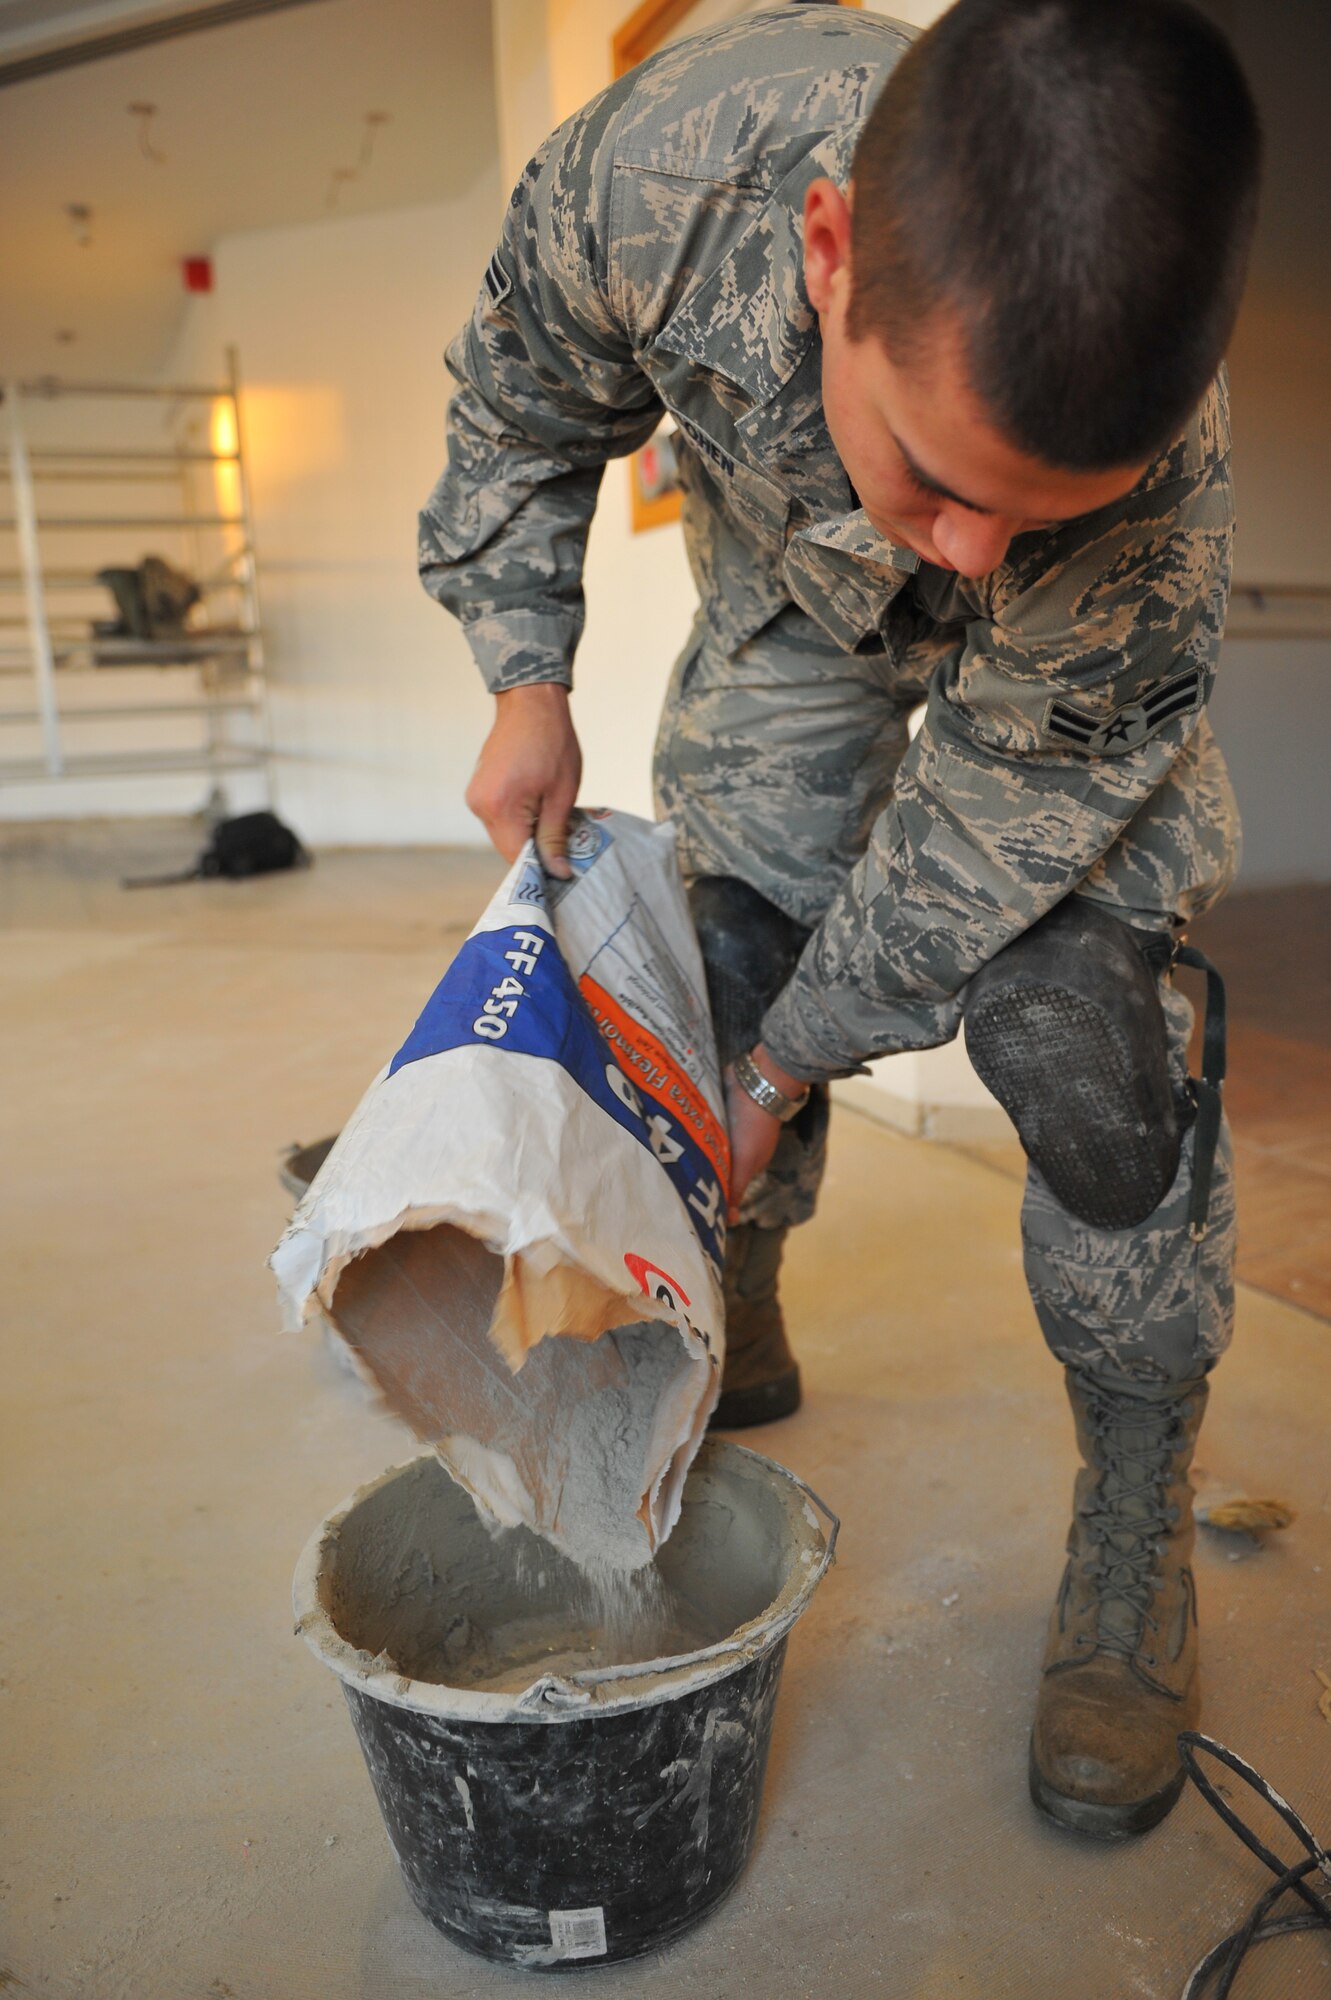 SPANGDAHLEM AIR BASE, Germany – Airman 1st Class Richard Cohen, 52nd Civil Engineer Squadron structures apprentice, pours flexible tile adhesive mix into a bucket inside the Mosel Dining Facility here Nov. 16. The 52nd CES is renovating the facility, to include, new flooring, paint, service line and storage facilities. Completion of the facility is scheduled for Jan. 15, 2012. (U.S. Air Force photo/Airman 1st Class Dillon Davis)